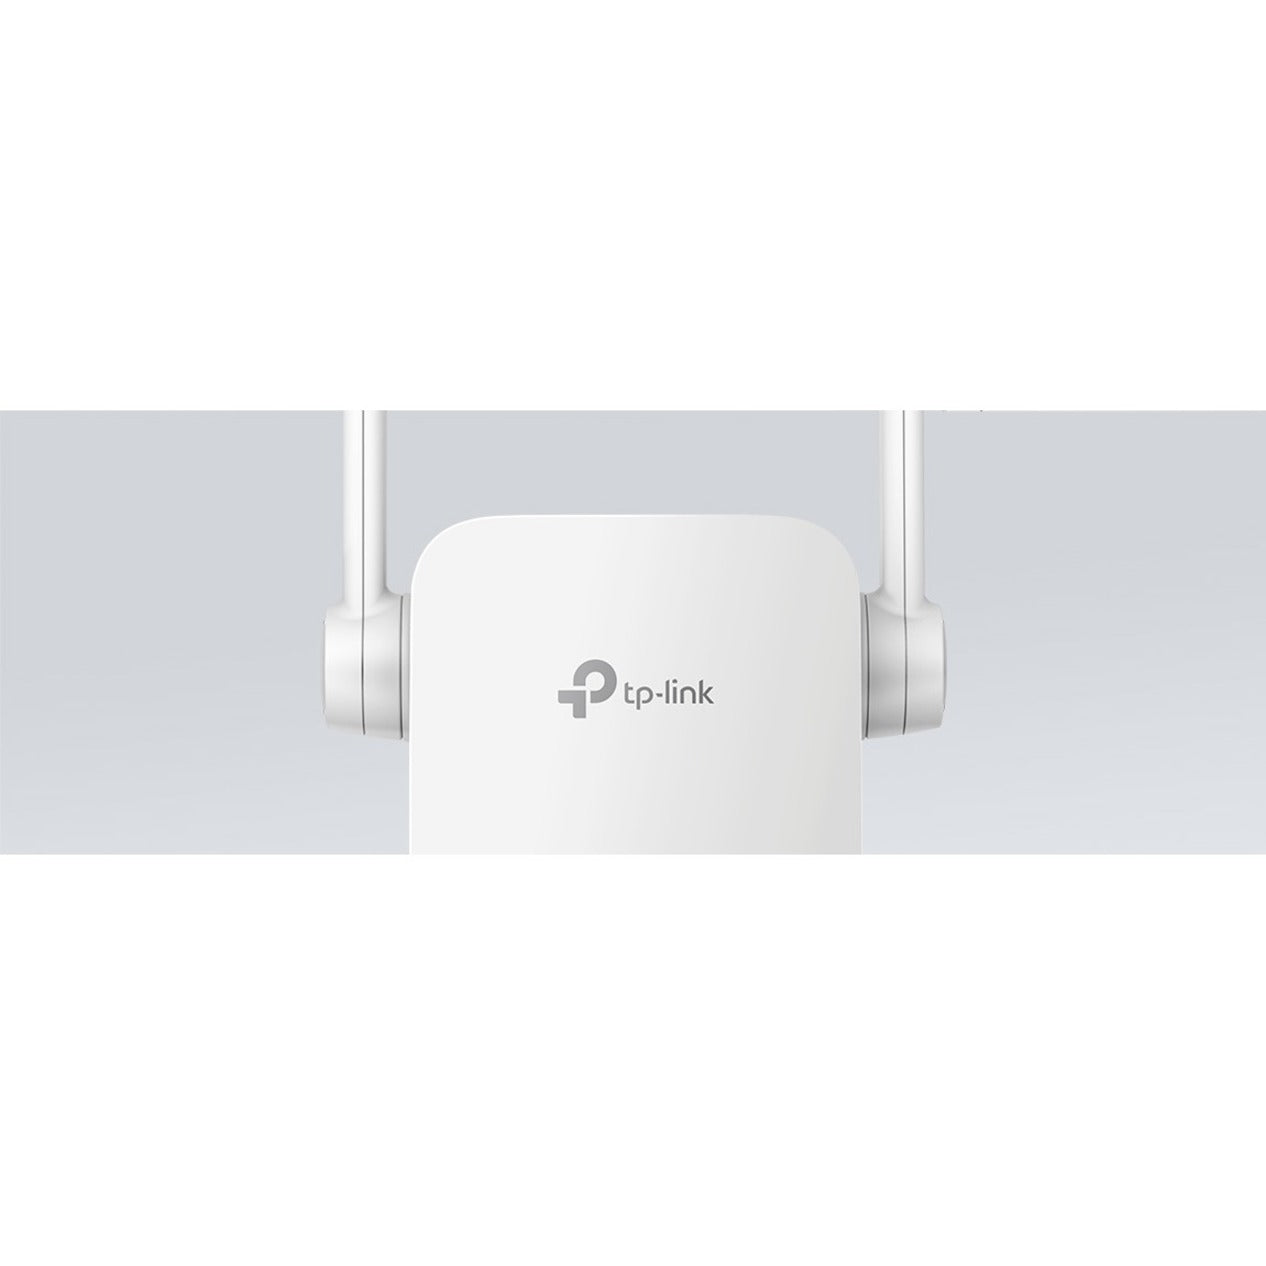 TP-Link AC750 Wi-Fi Range Extender - Extend Your Wi-Fi Coverage [Discontinued]